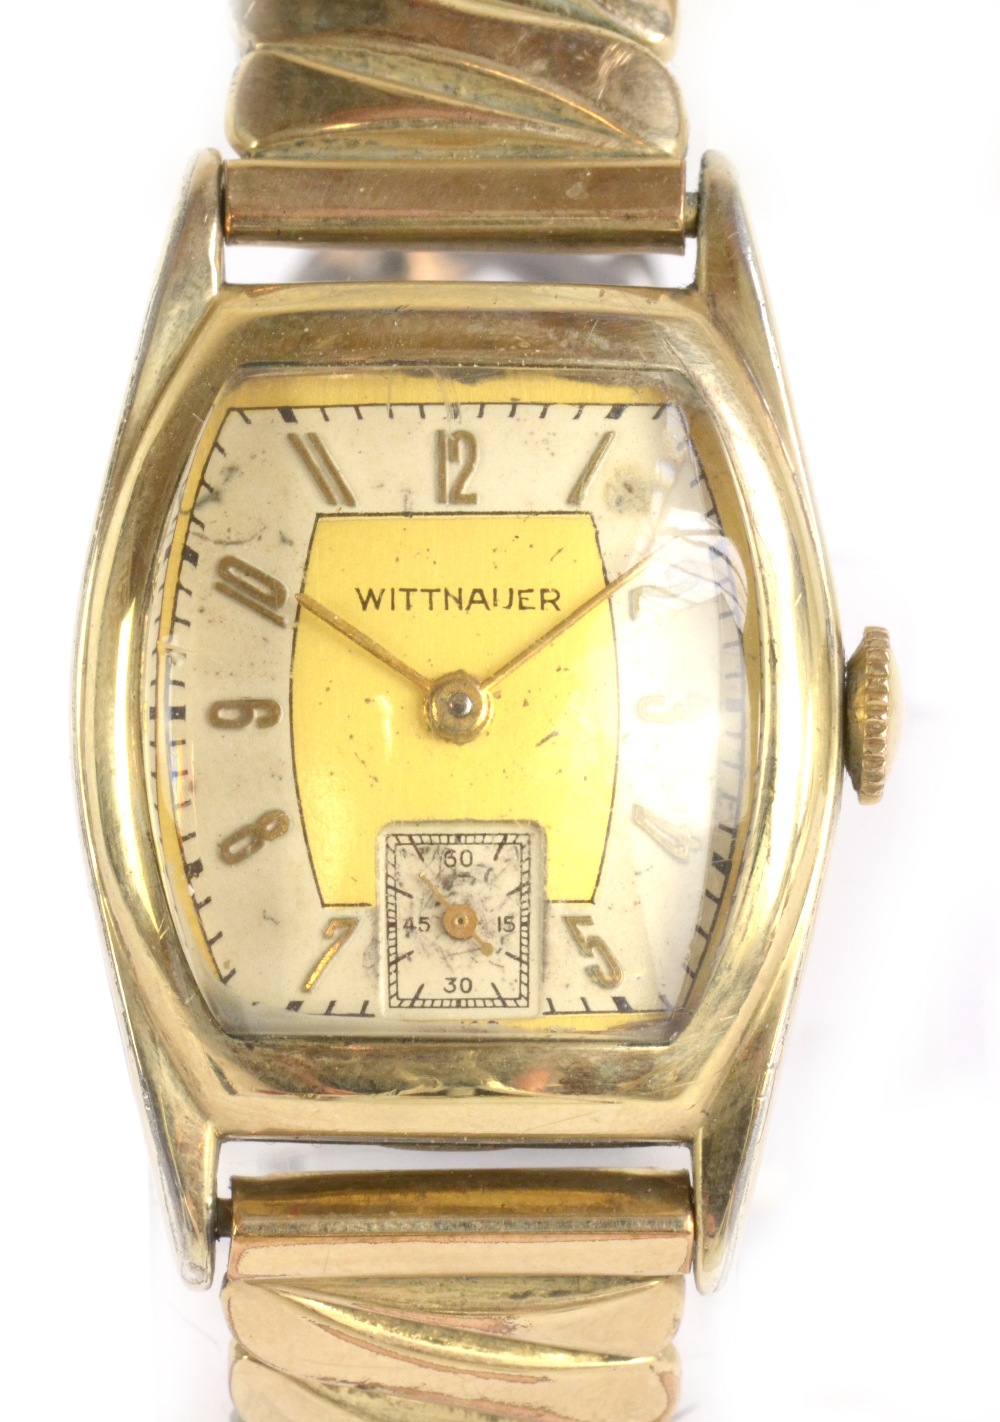 LONGINES-WITTNAUER; a 1940s gold plated and stainless steel wristwatch with tonnaeu case set with